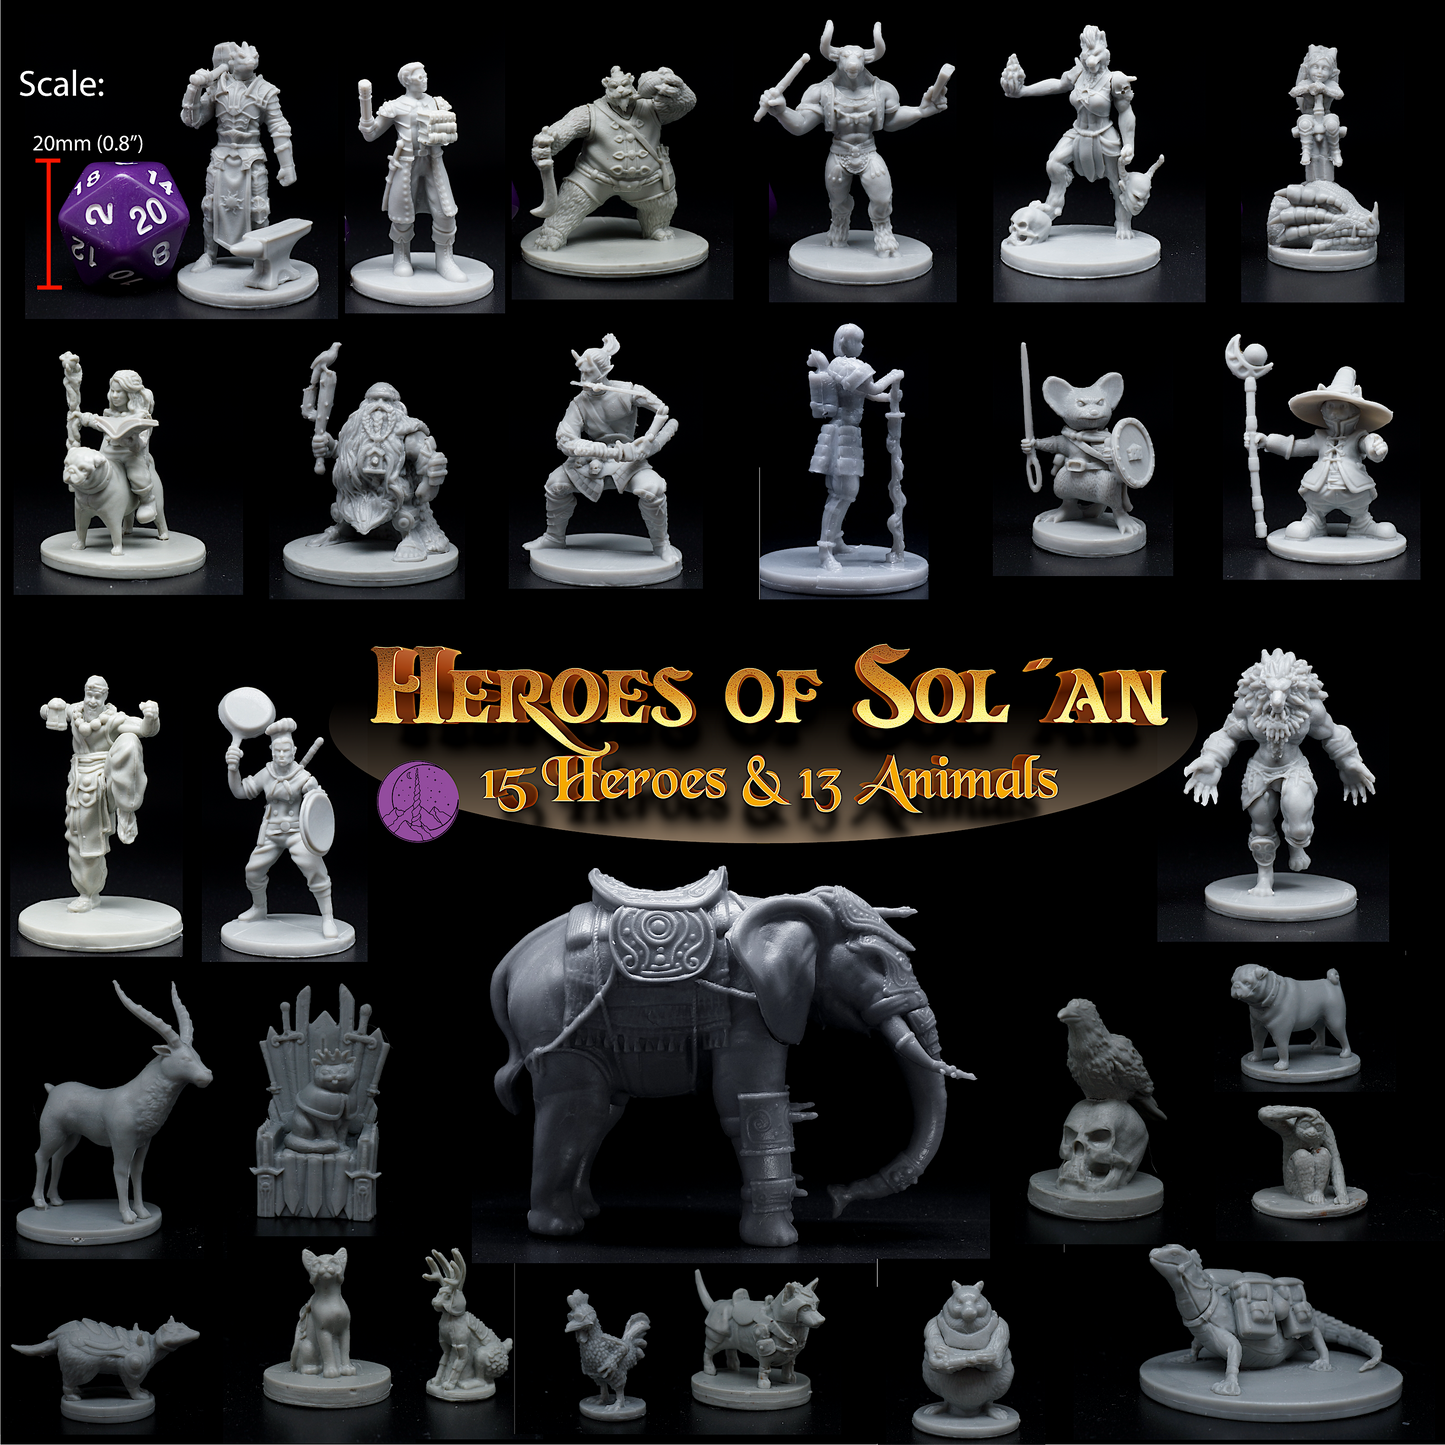 29 Heroes, Animal Companions, and Troll Miniatures Set for DND